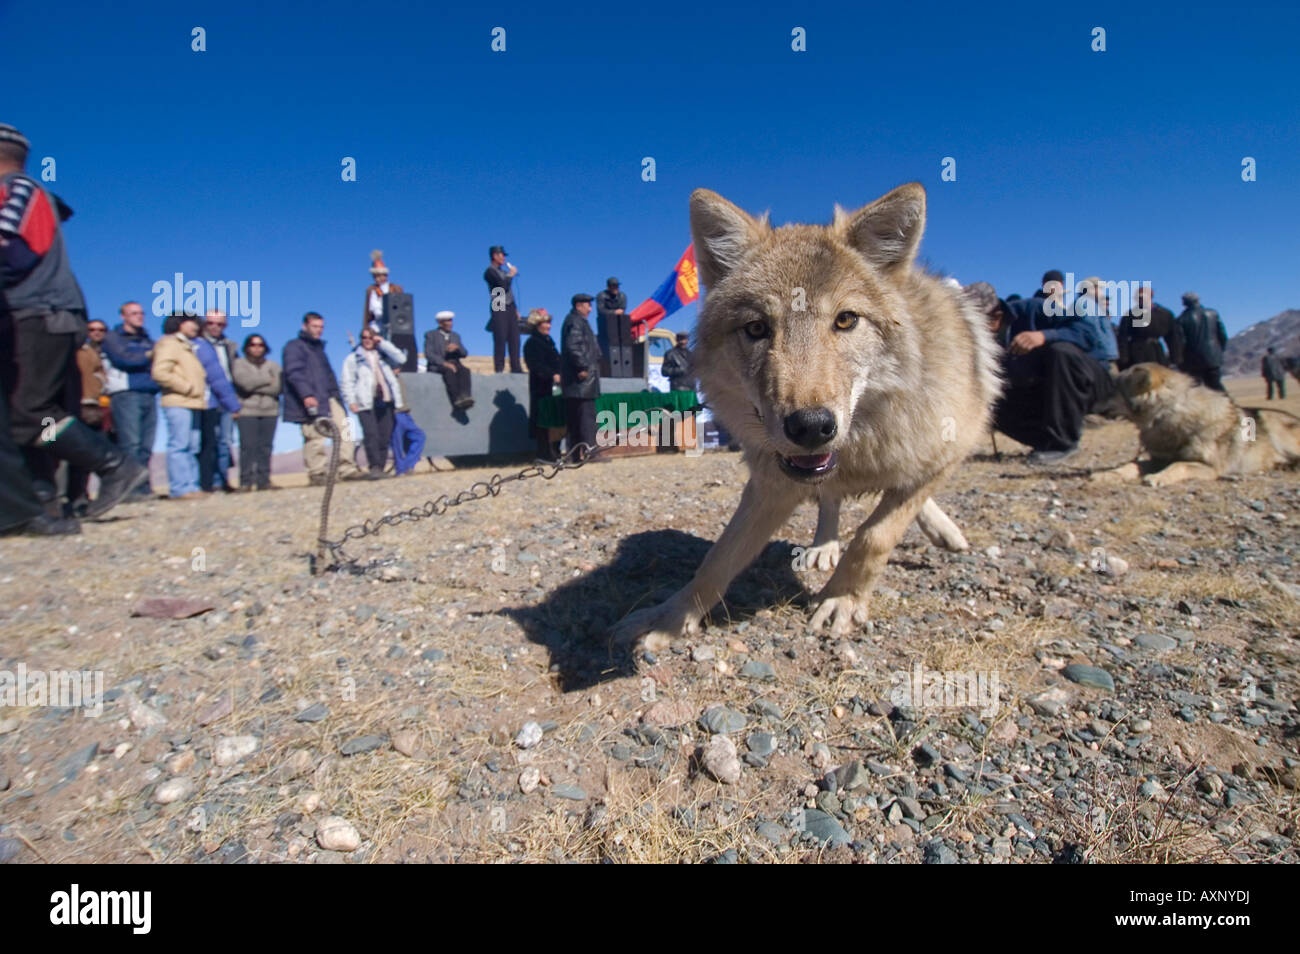 A captive wolf held to demonstrate eagle hunting at the annual eagle hunting festival Stock Photo